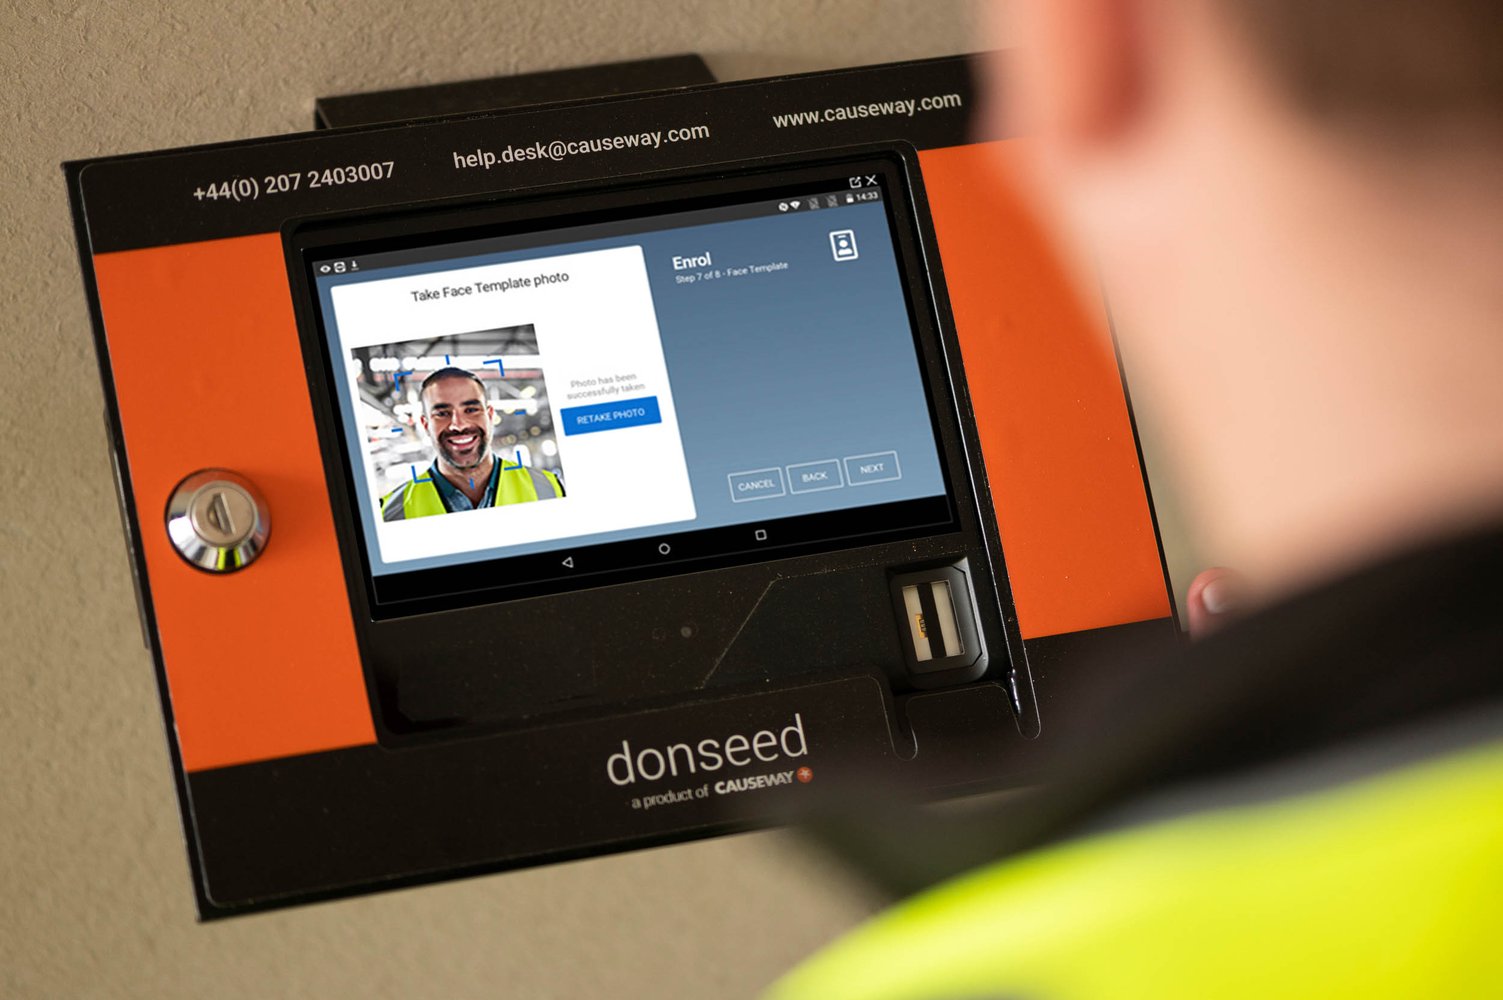 Man scans face on construction time and attendance software